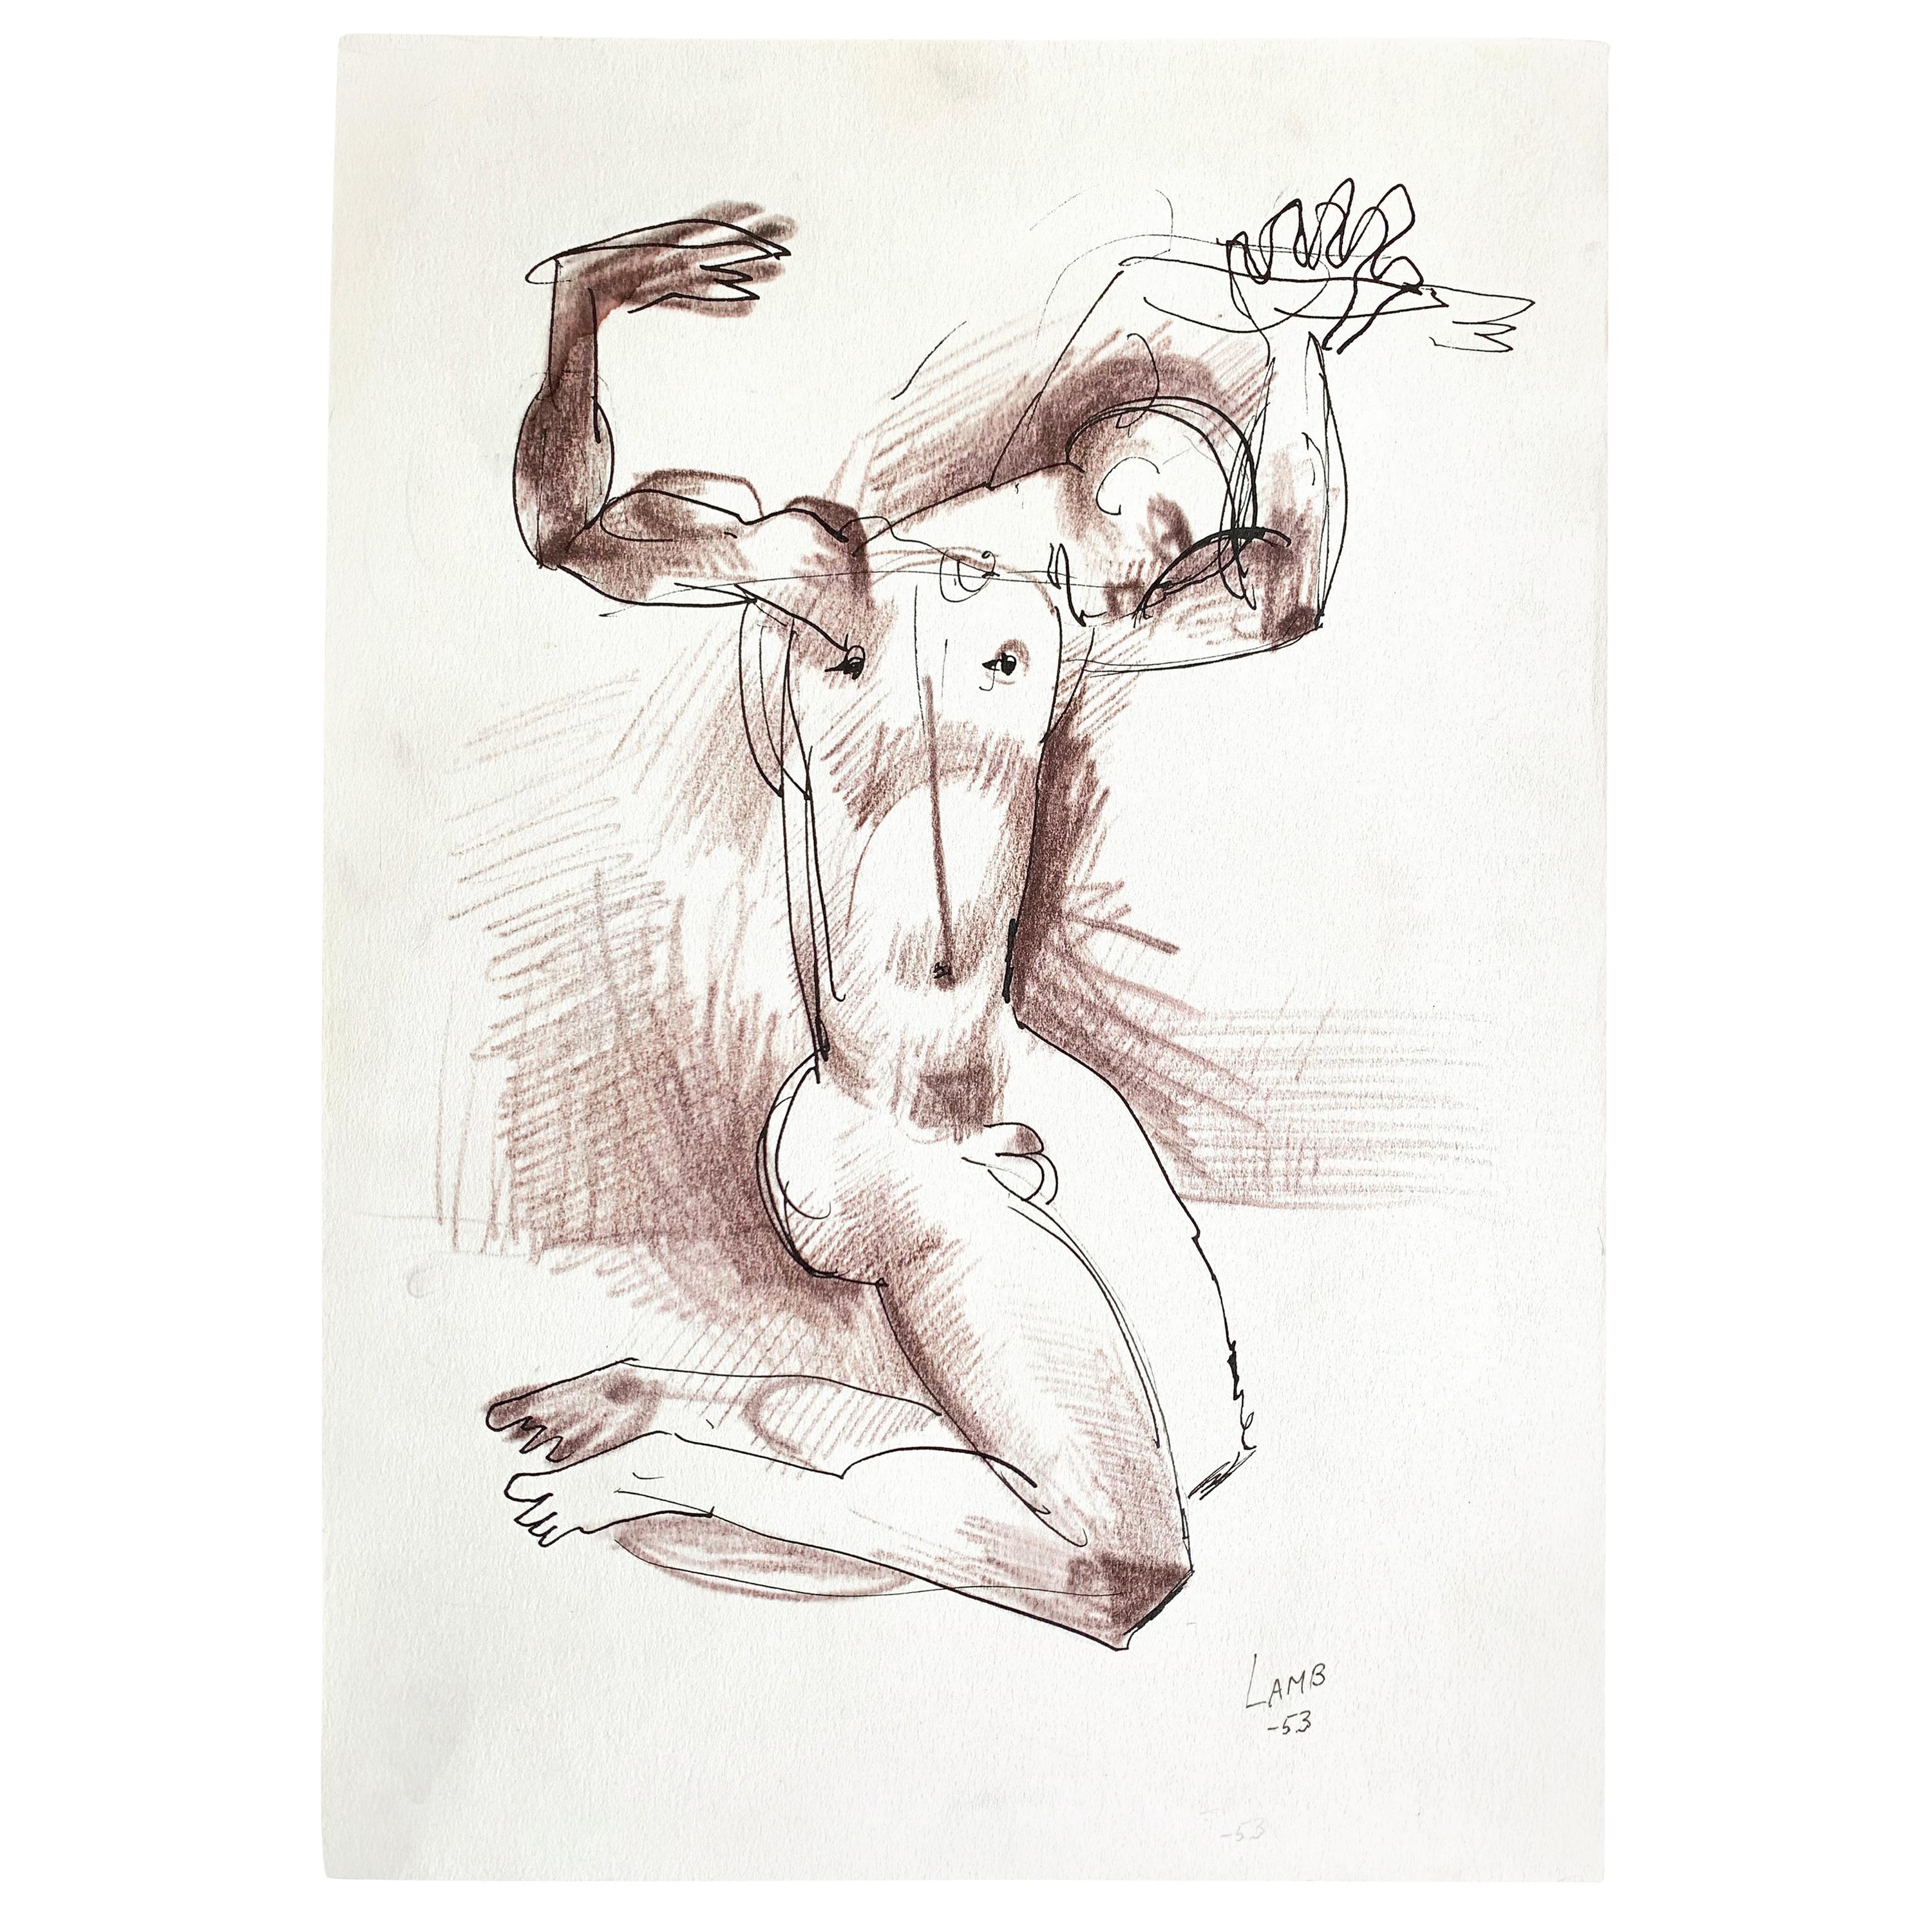 "Nude Male with Upraised Arms," Striking Midcentury Drawing by RISD Teacher